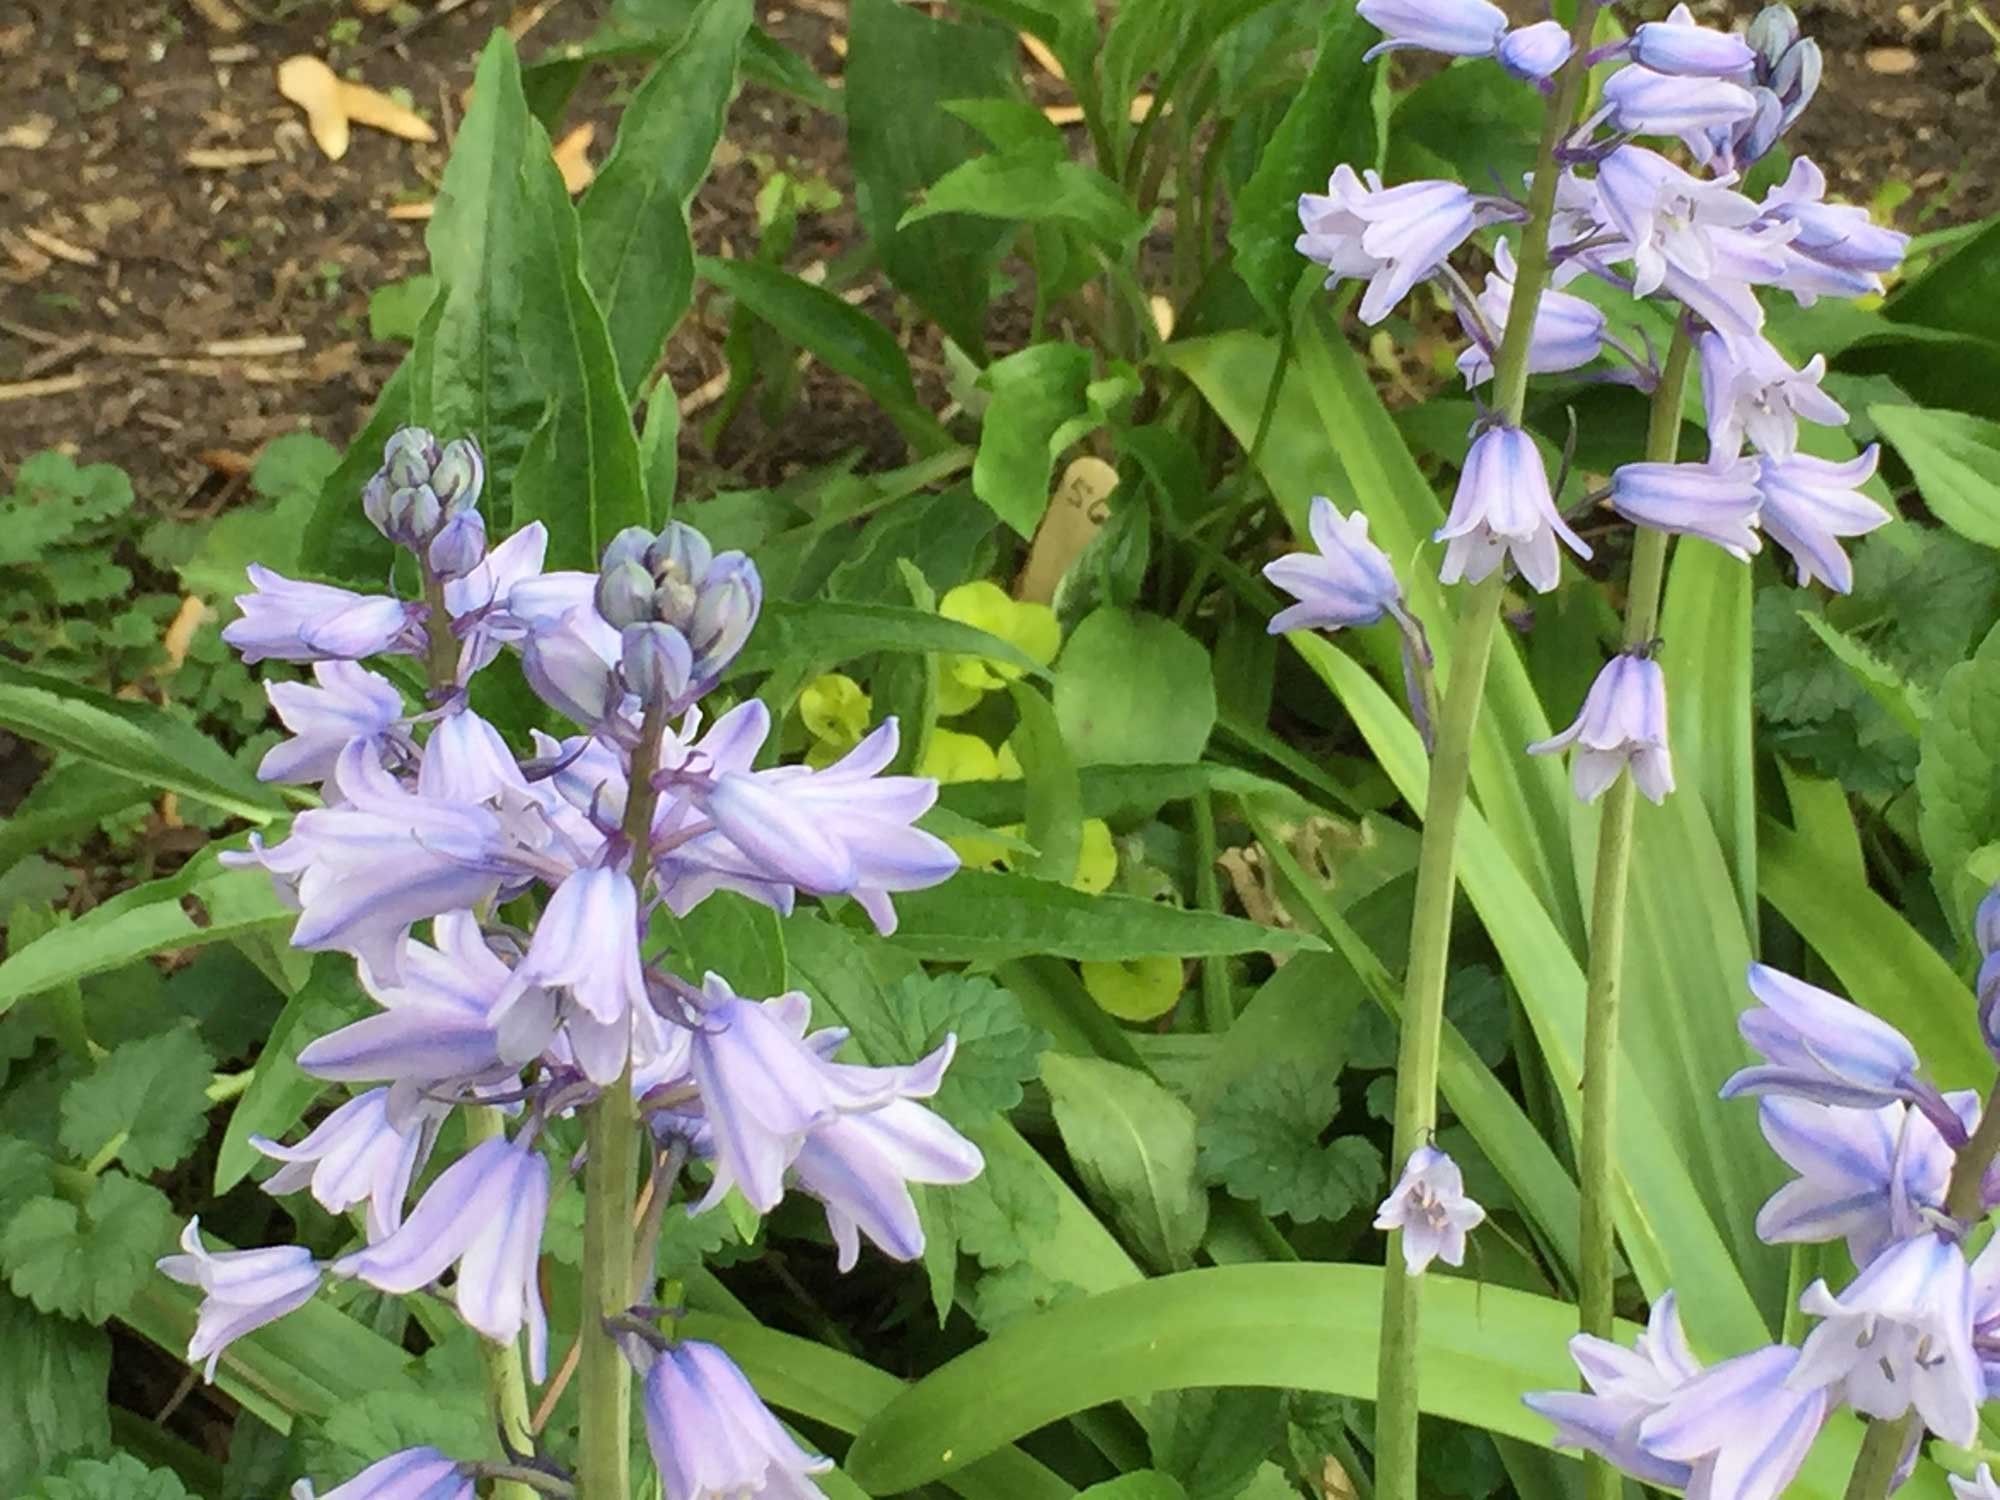 close-up of Spanish Bluebells against a backdrop of their green leaves